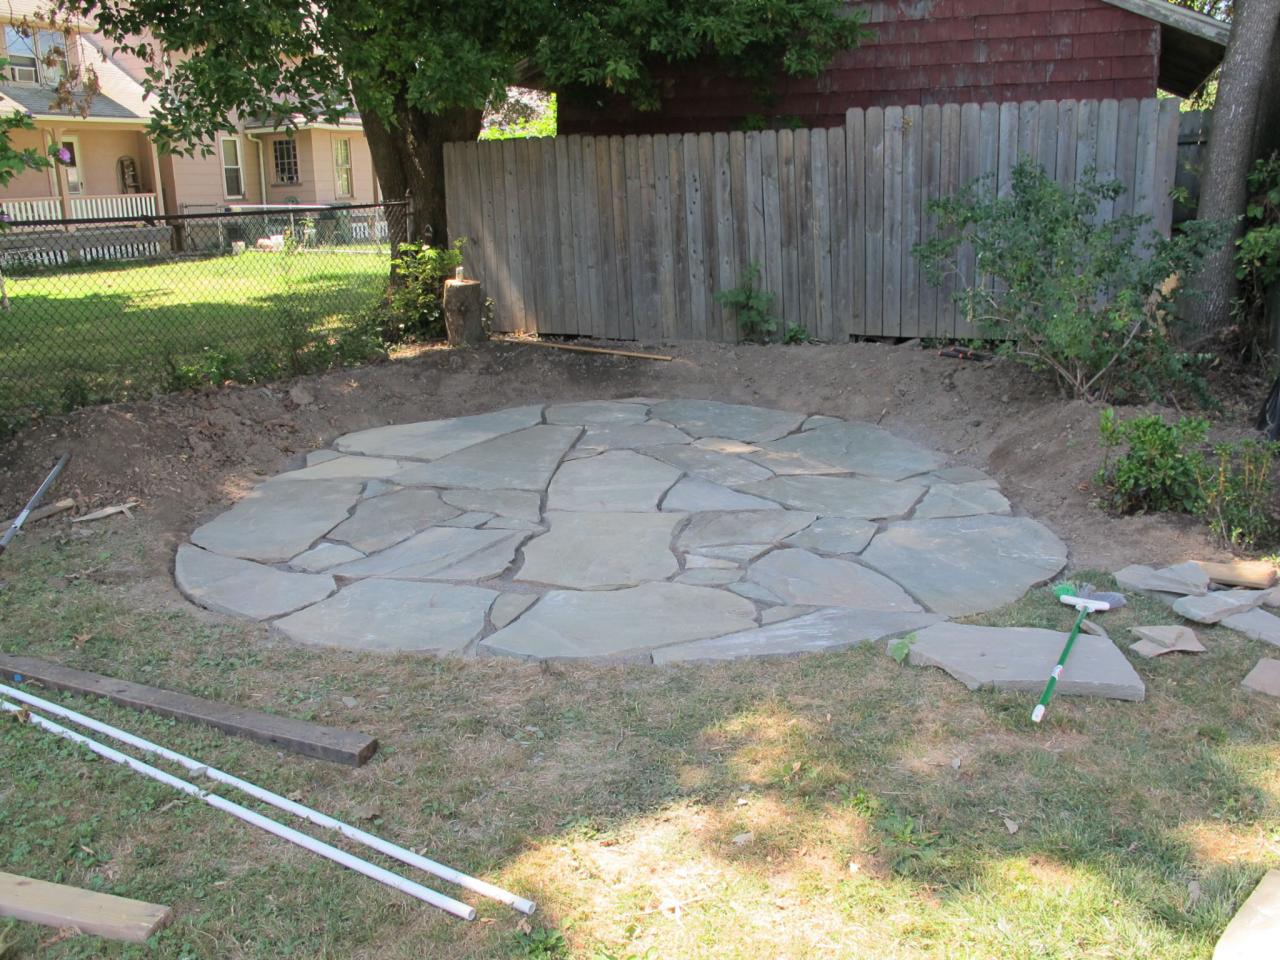 Image 30 of What To Put Between Patio Stones